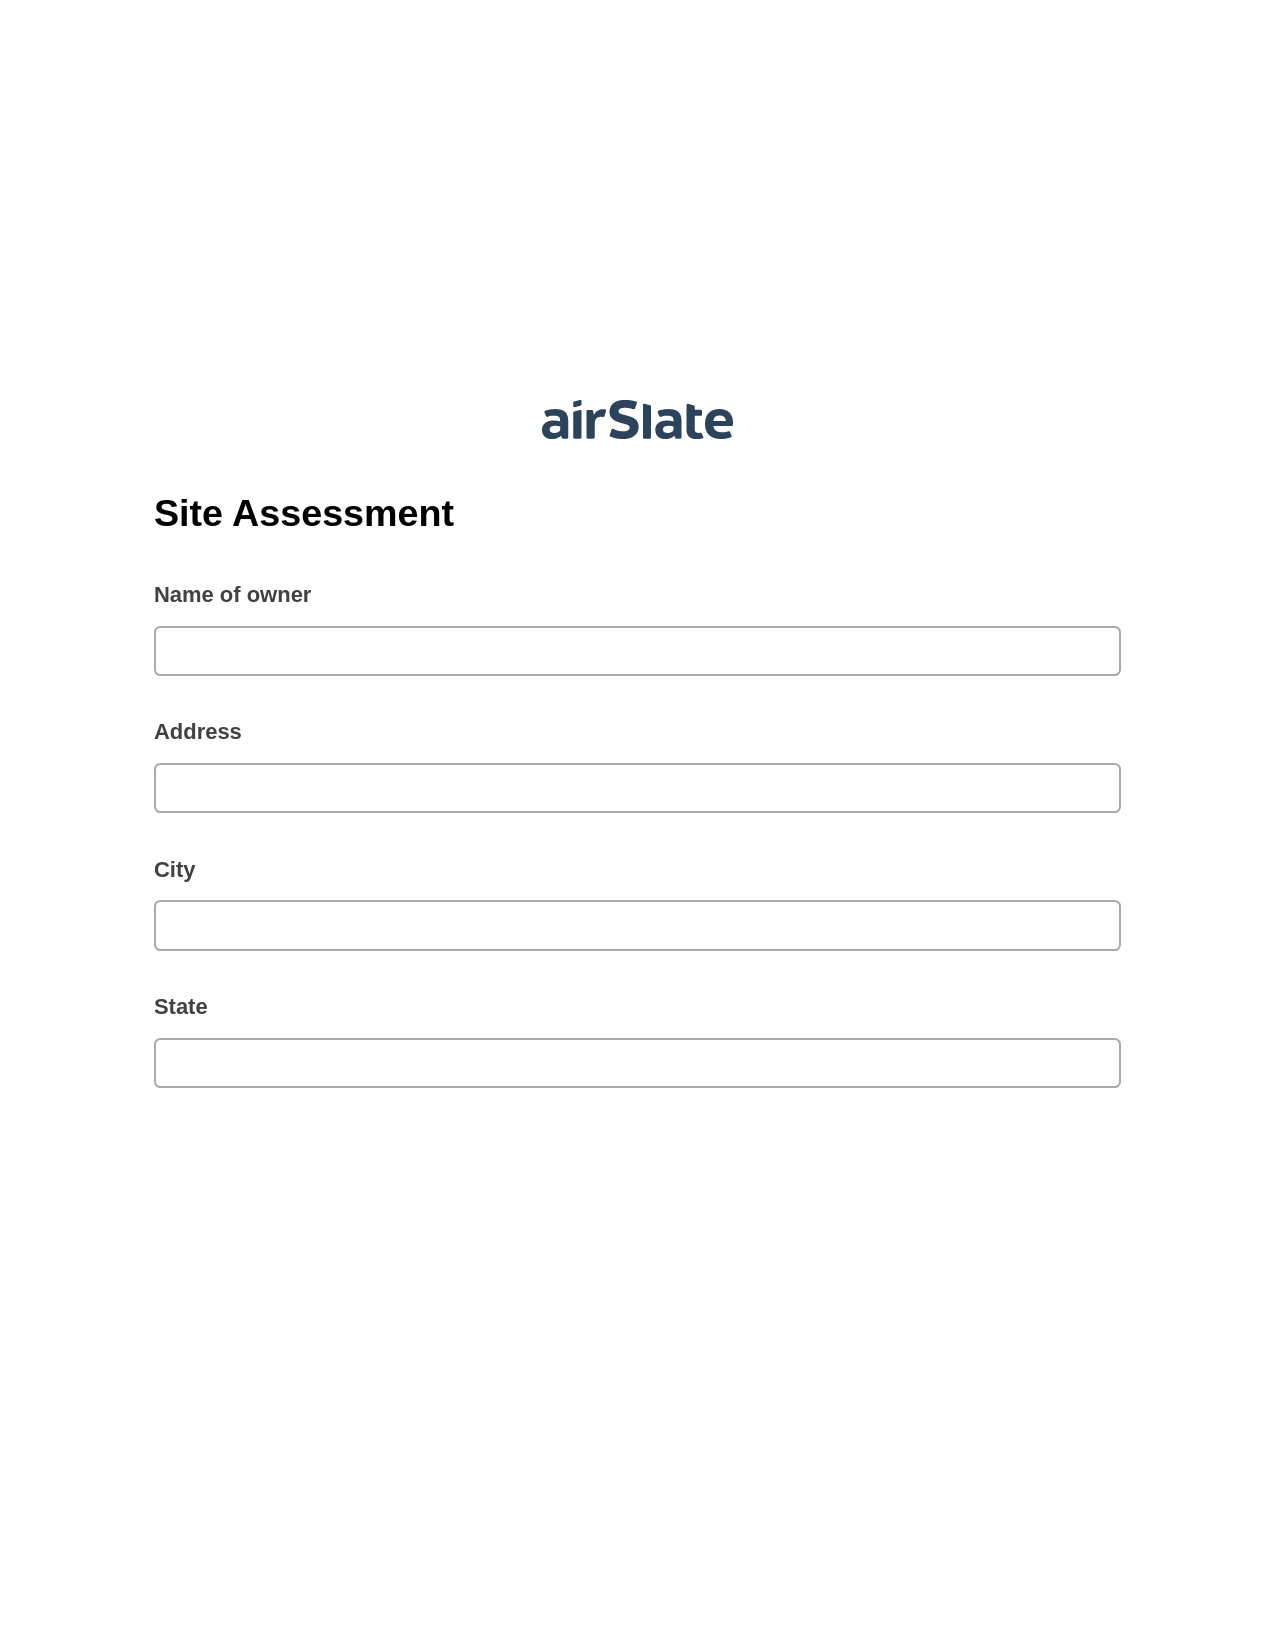 Site Assessment Pre-fill from Smartsheet Bot, Google Cloud Print Bot, Archive to SharePoint Folder Bot